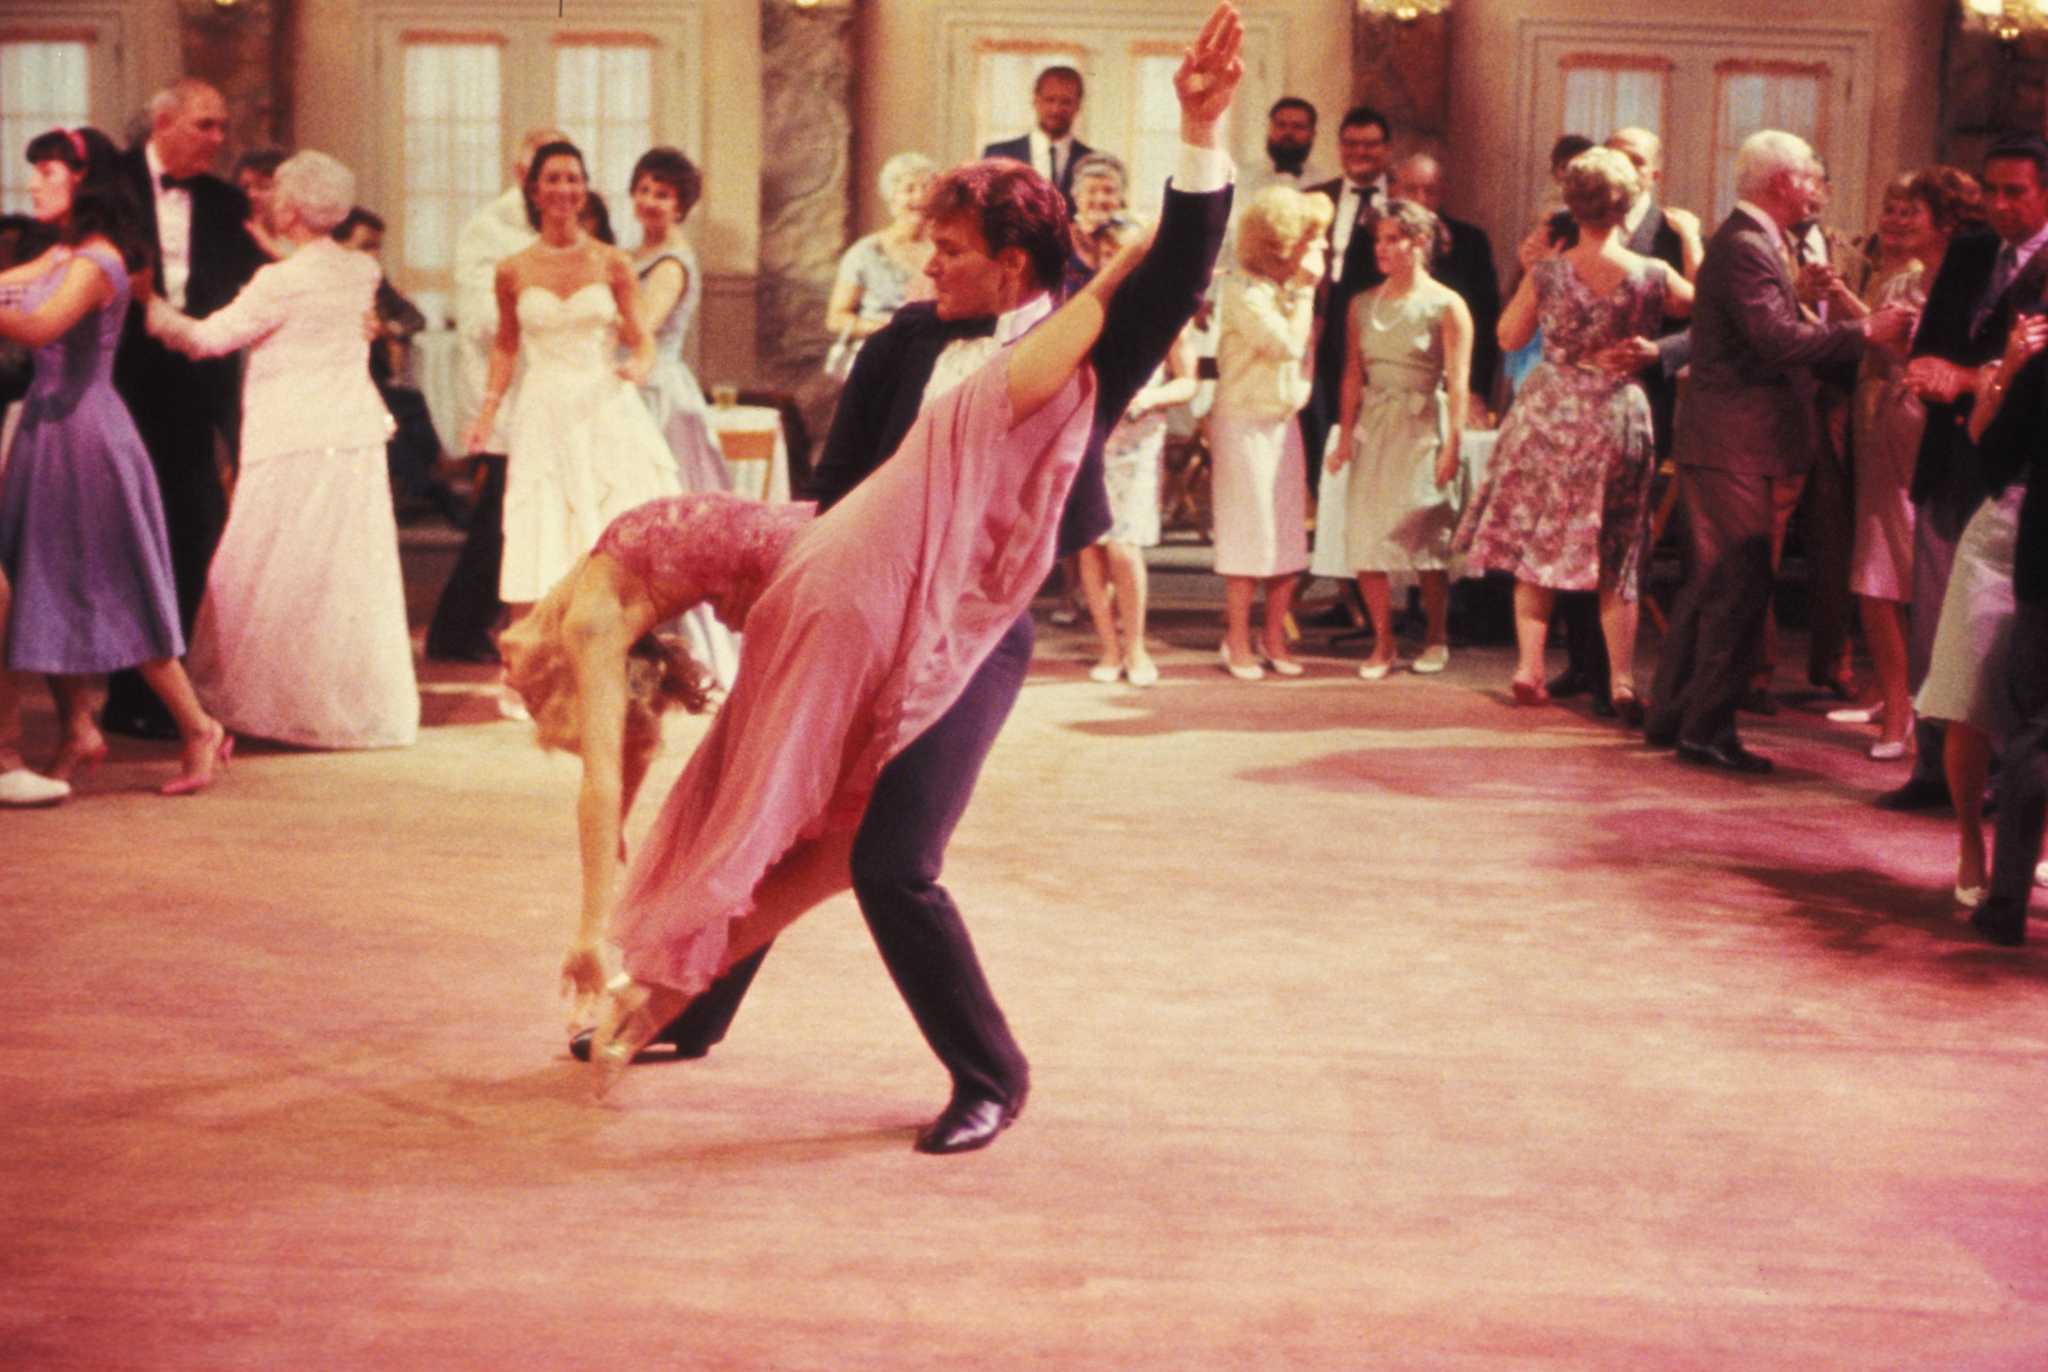 Still of Patrick Swayze and Cynthia Rhodes in Dirty Dancing (1987)